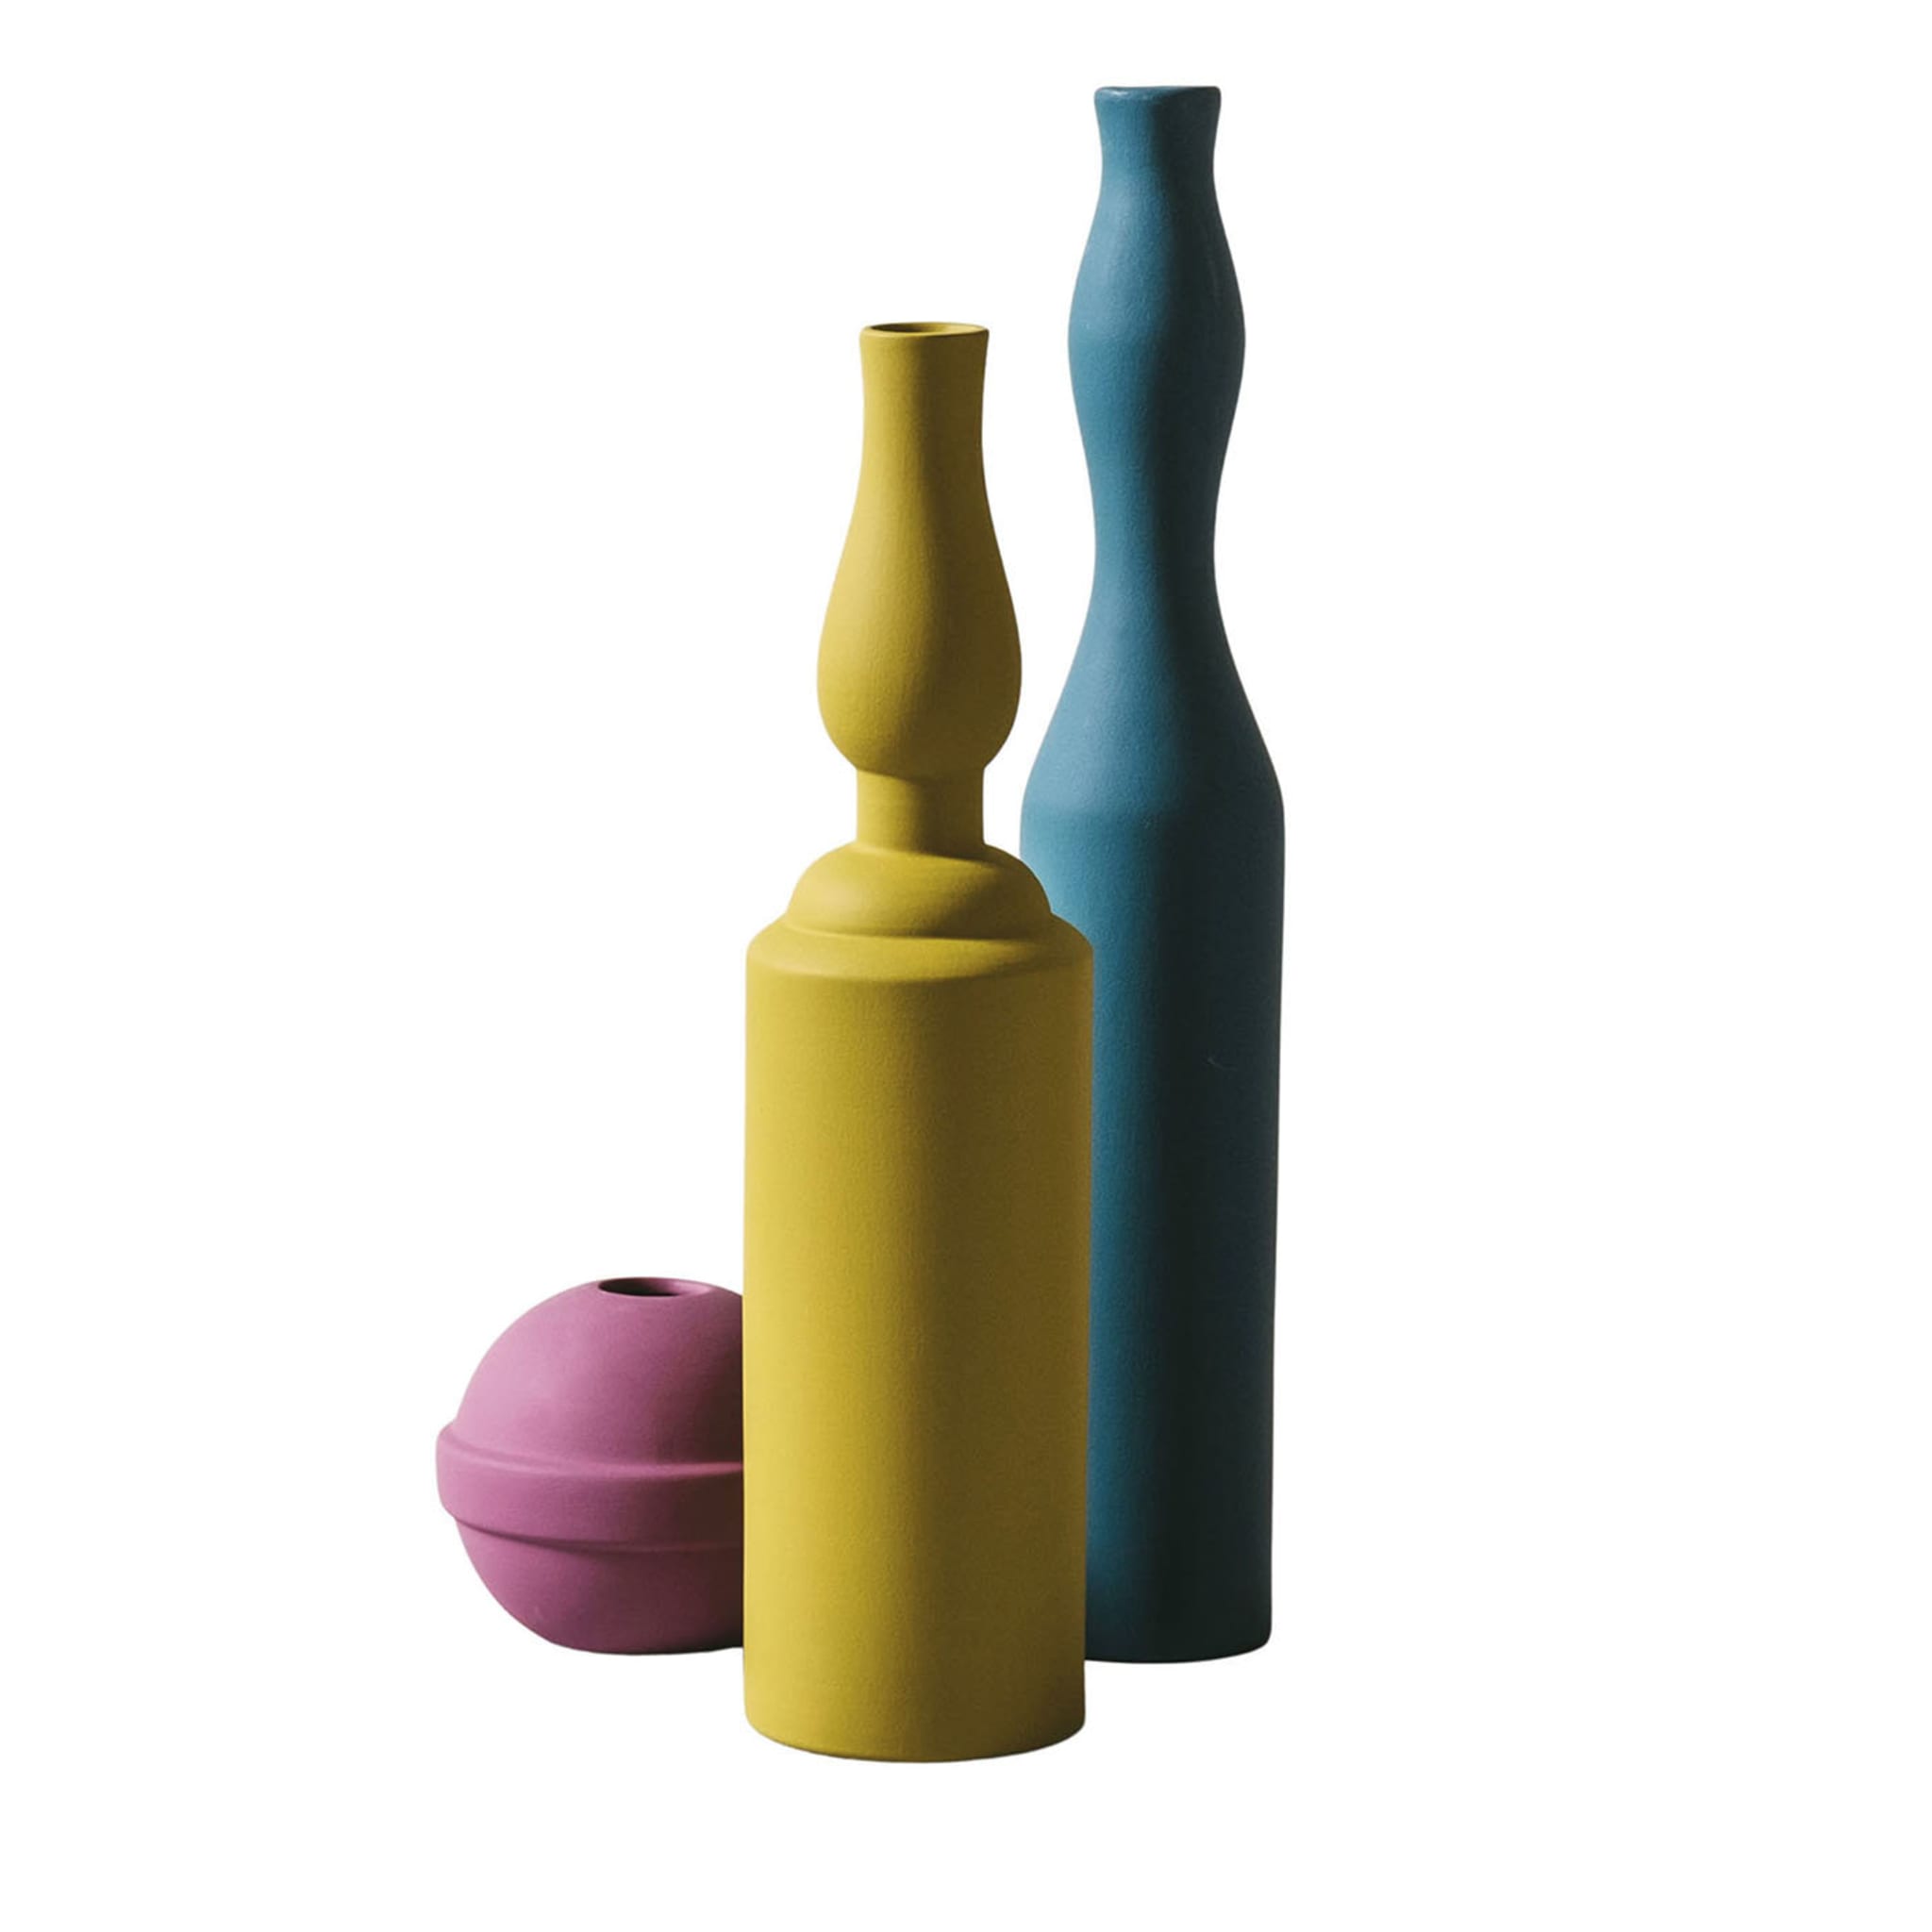 Set of 3 Vases by Sonia Pedrazzini #4 - Main view